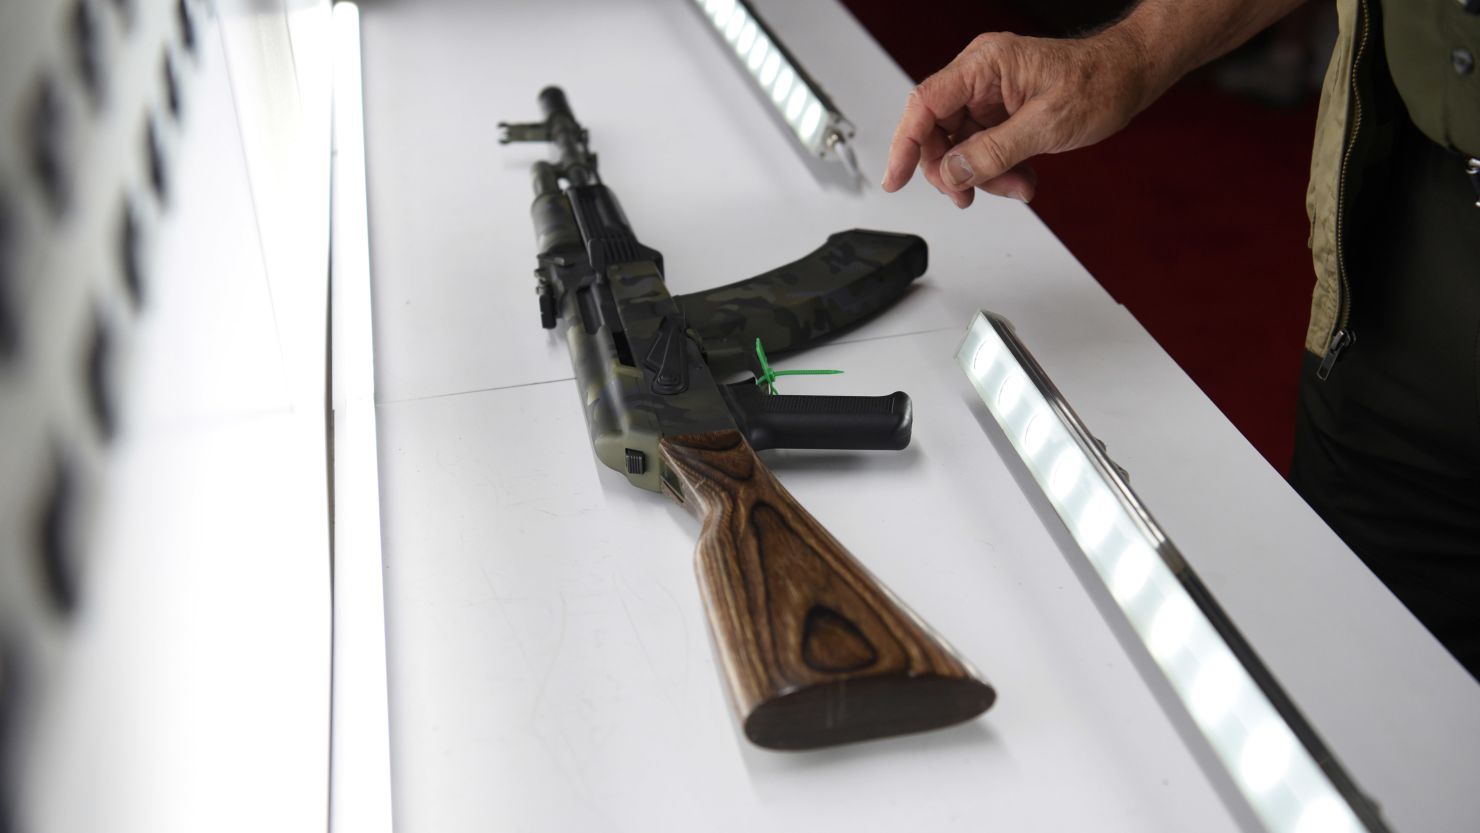 An attendee looks at a gun on display at the National Rifle Association annual convention in Houston, Texas, on May 28, 2022.